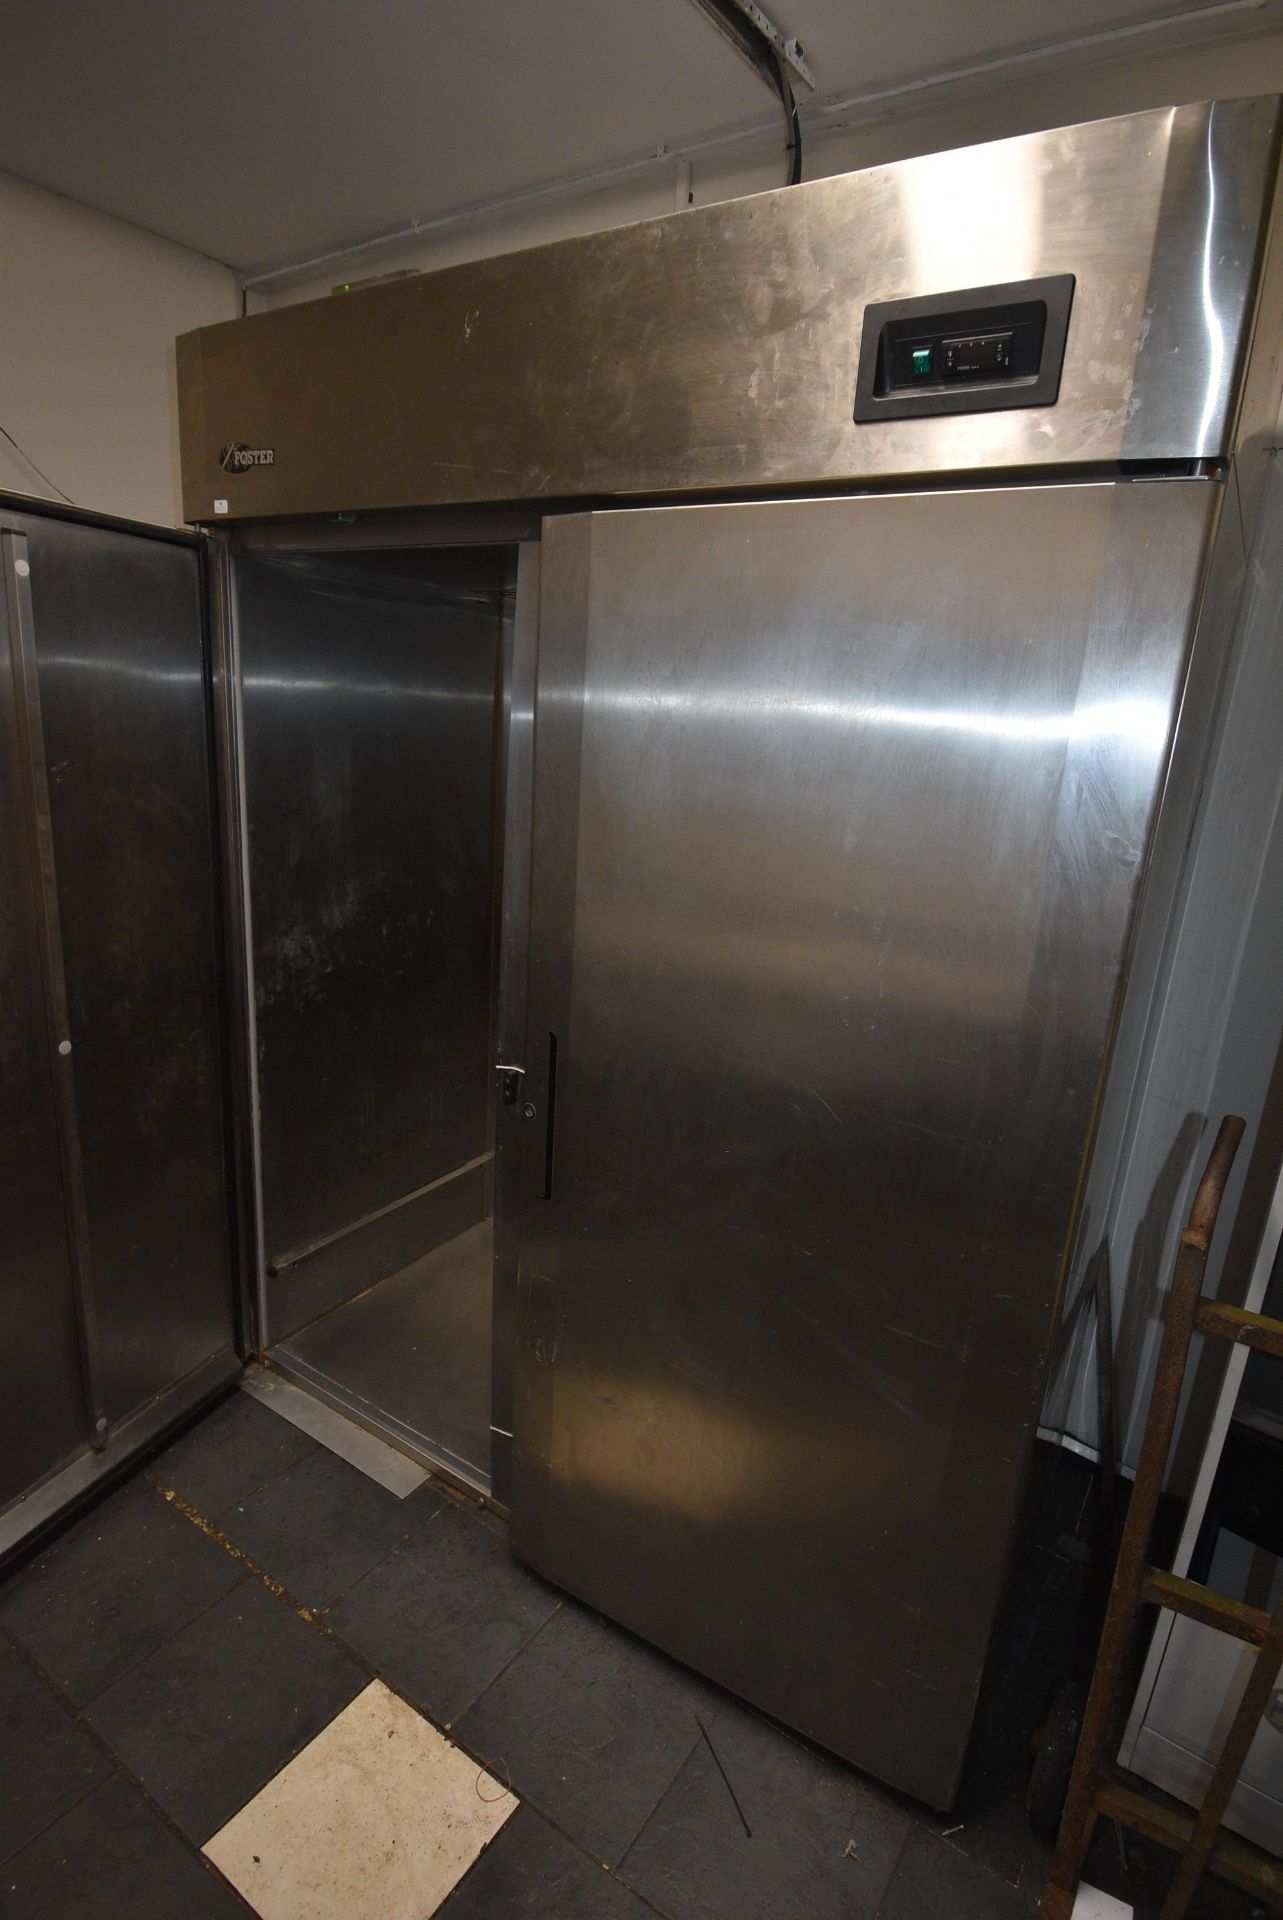 Foster Stainless Steel Two Door Refrigerator Model: GRL2H, Single Phase - Image 2 of 3